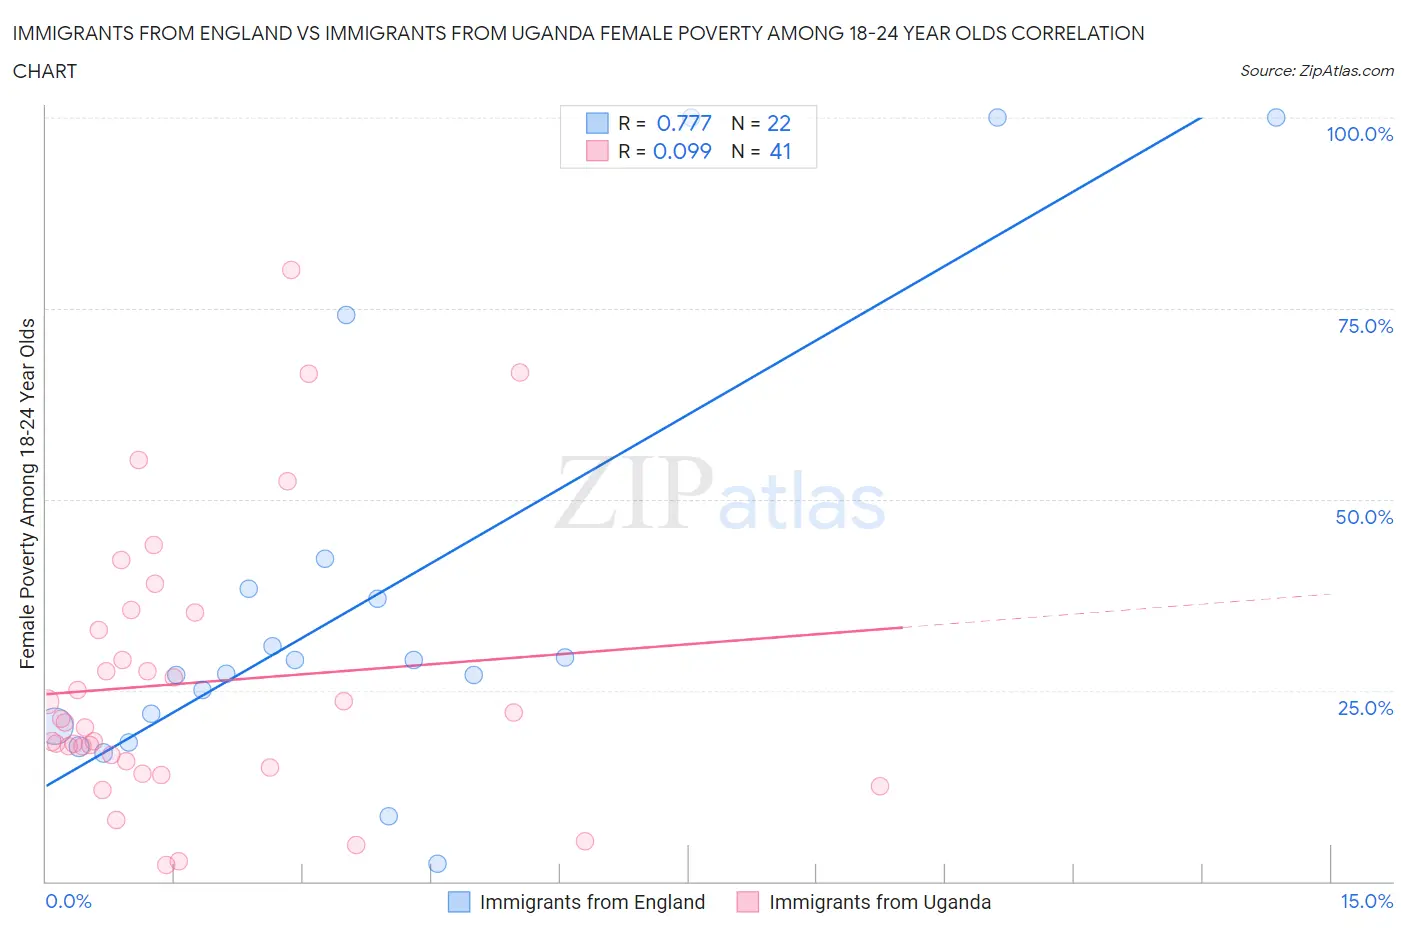 Immigrants from England vs Immigrants from Uganda Female Poverty Among 18-24 Year Olds